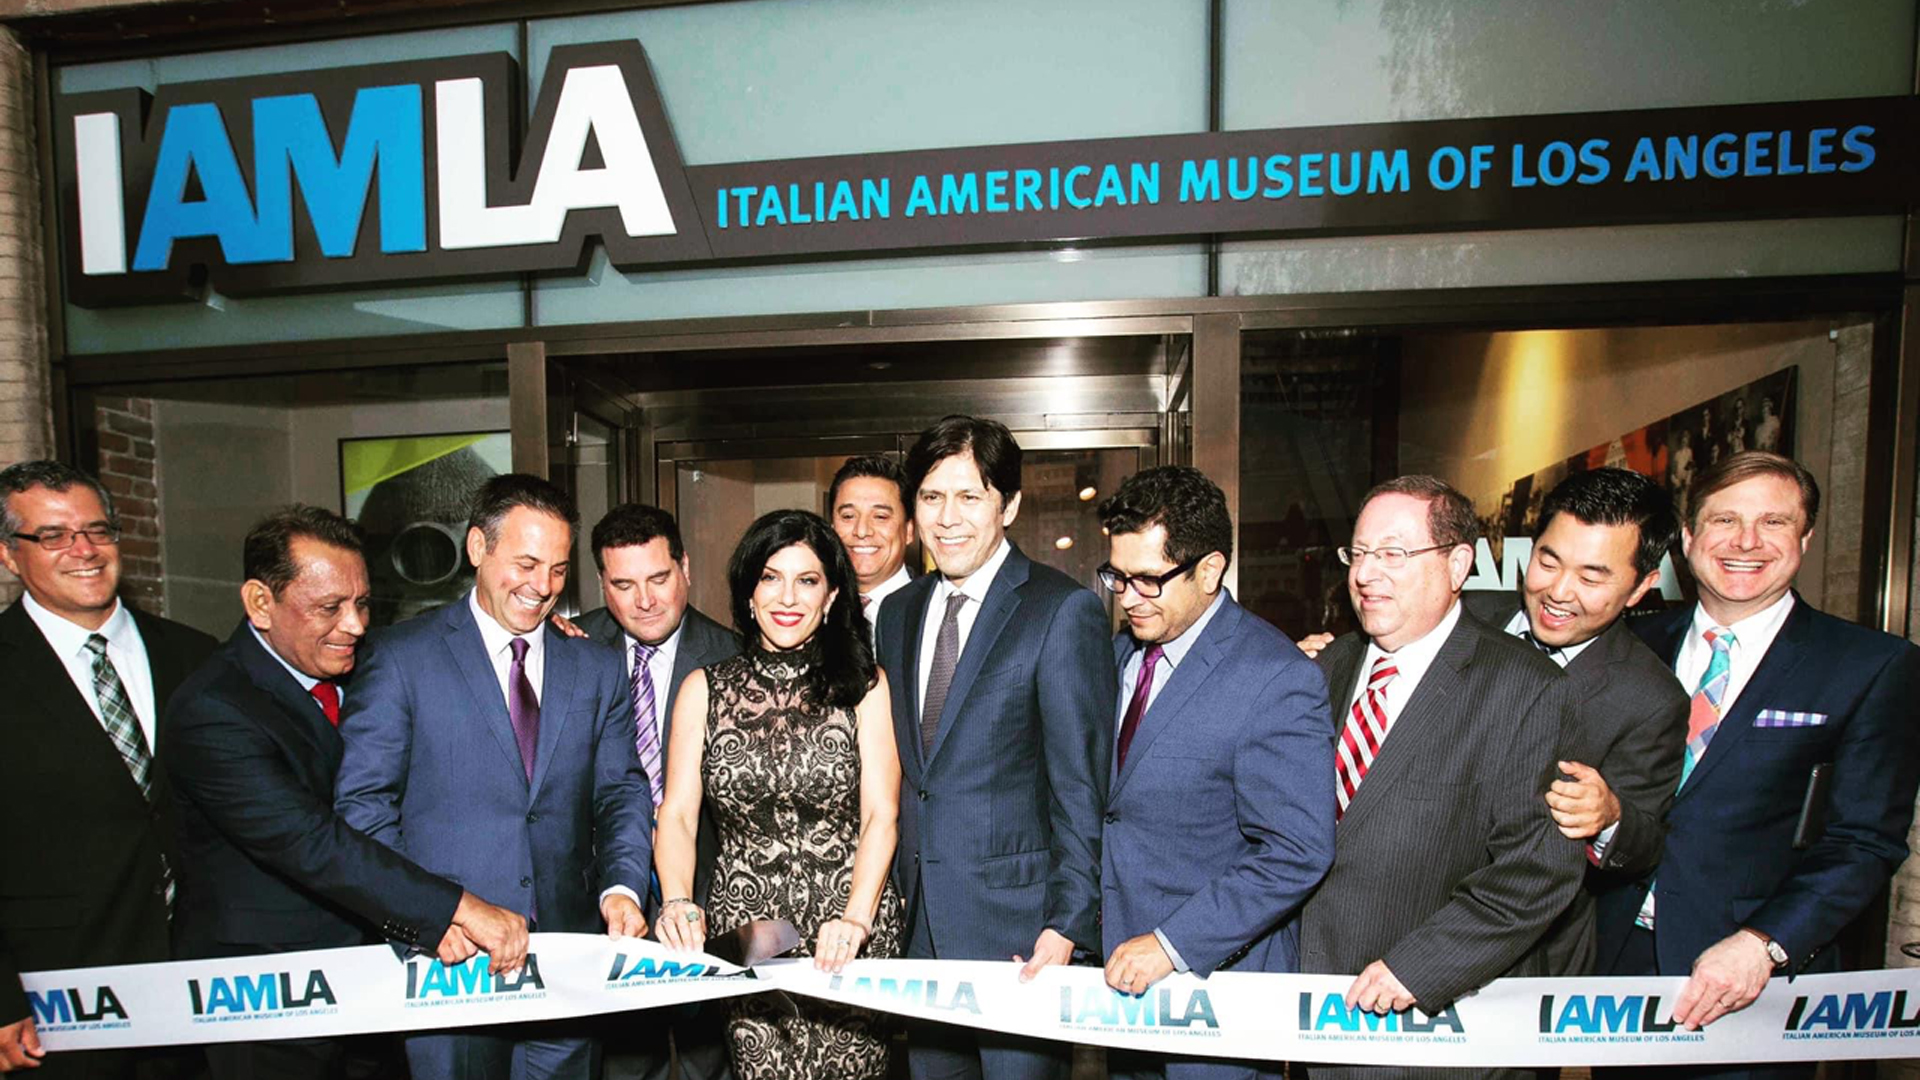 Marianna Gatto and the Italian American Museum of Los Angeles